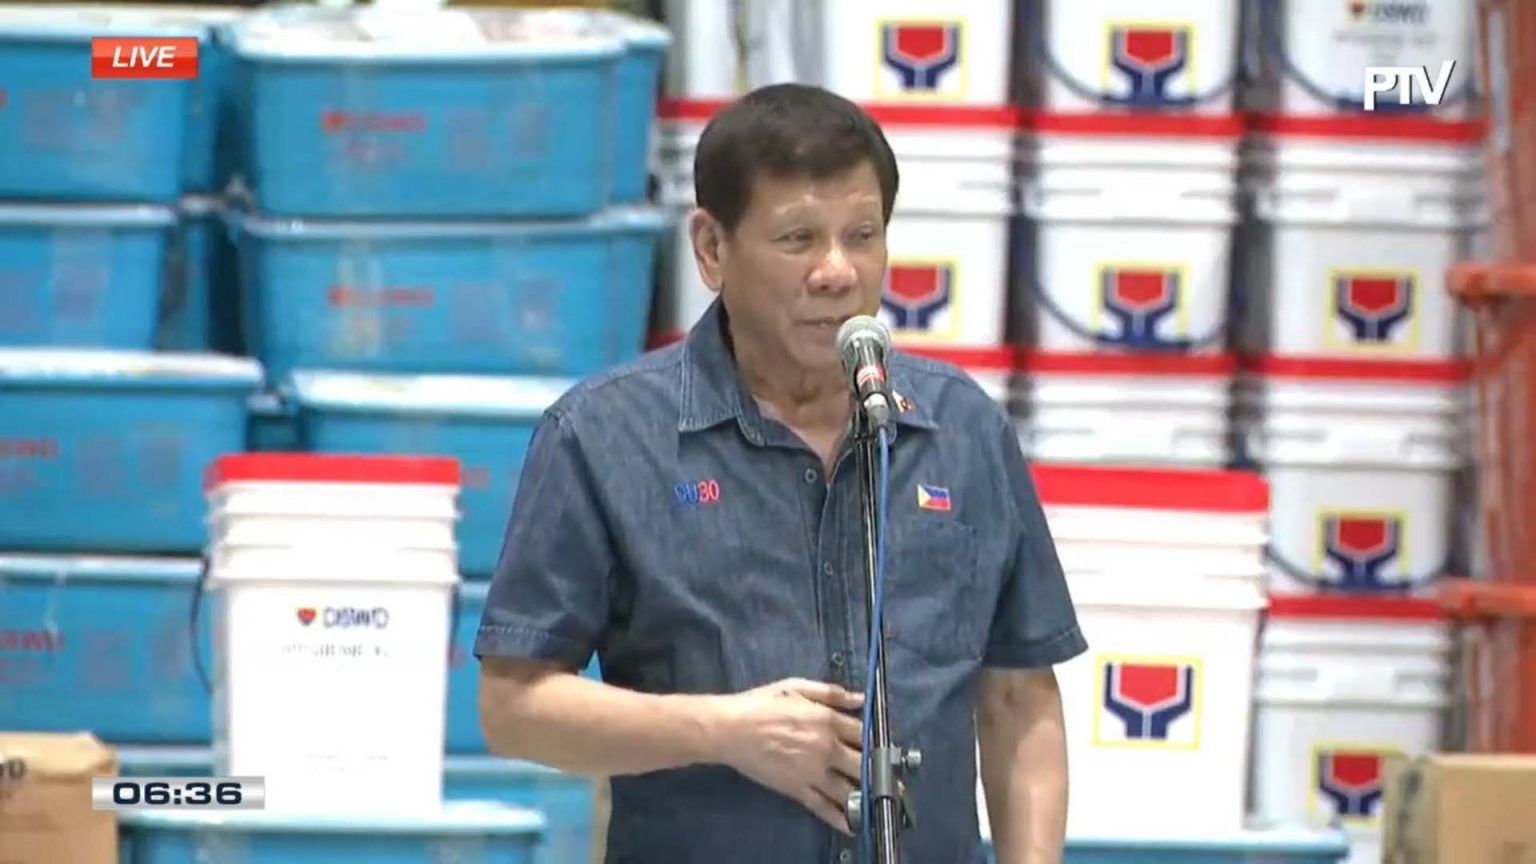 Duterte promises housing for â��Agatonâ�� victims, but says this will take â��longâ��